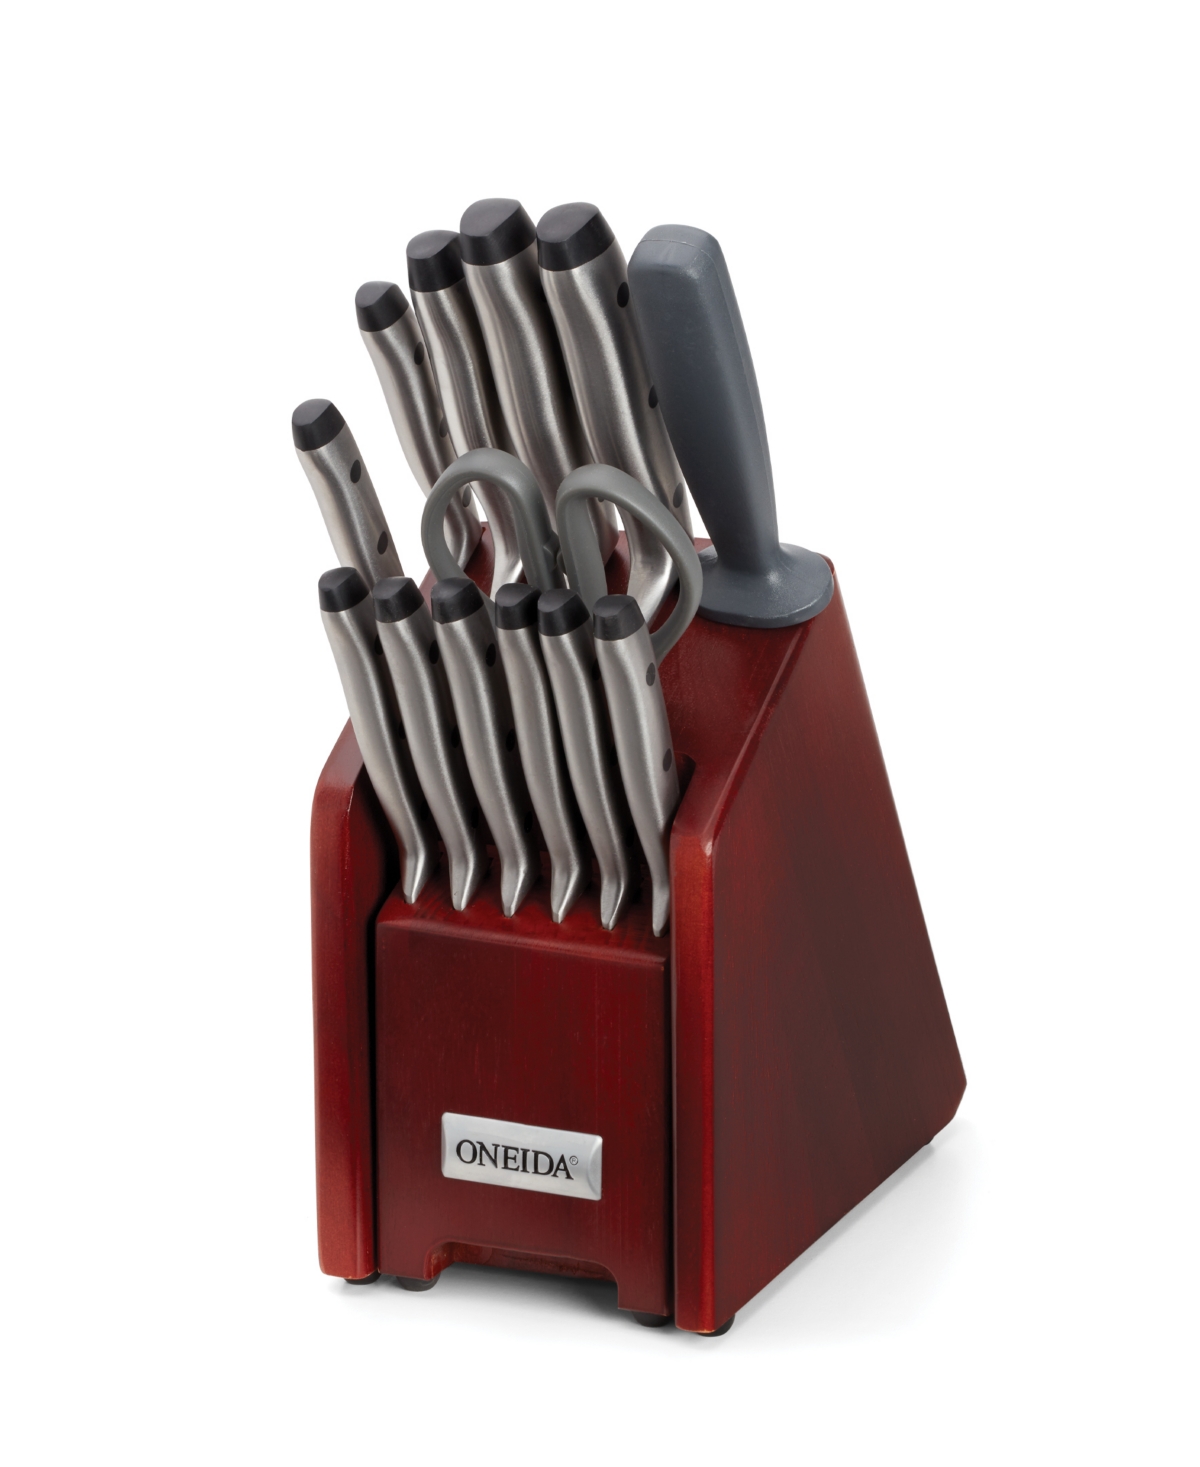 Oneida Pro Series 14 Piece Stainless Steel Cutlery Set In Metallic And Stainless